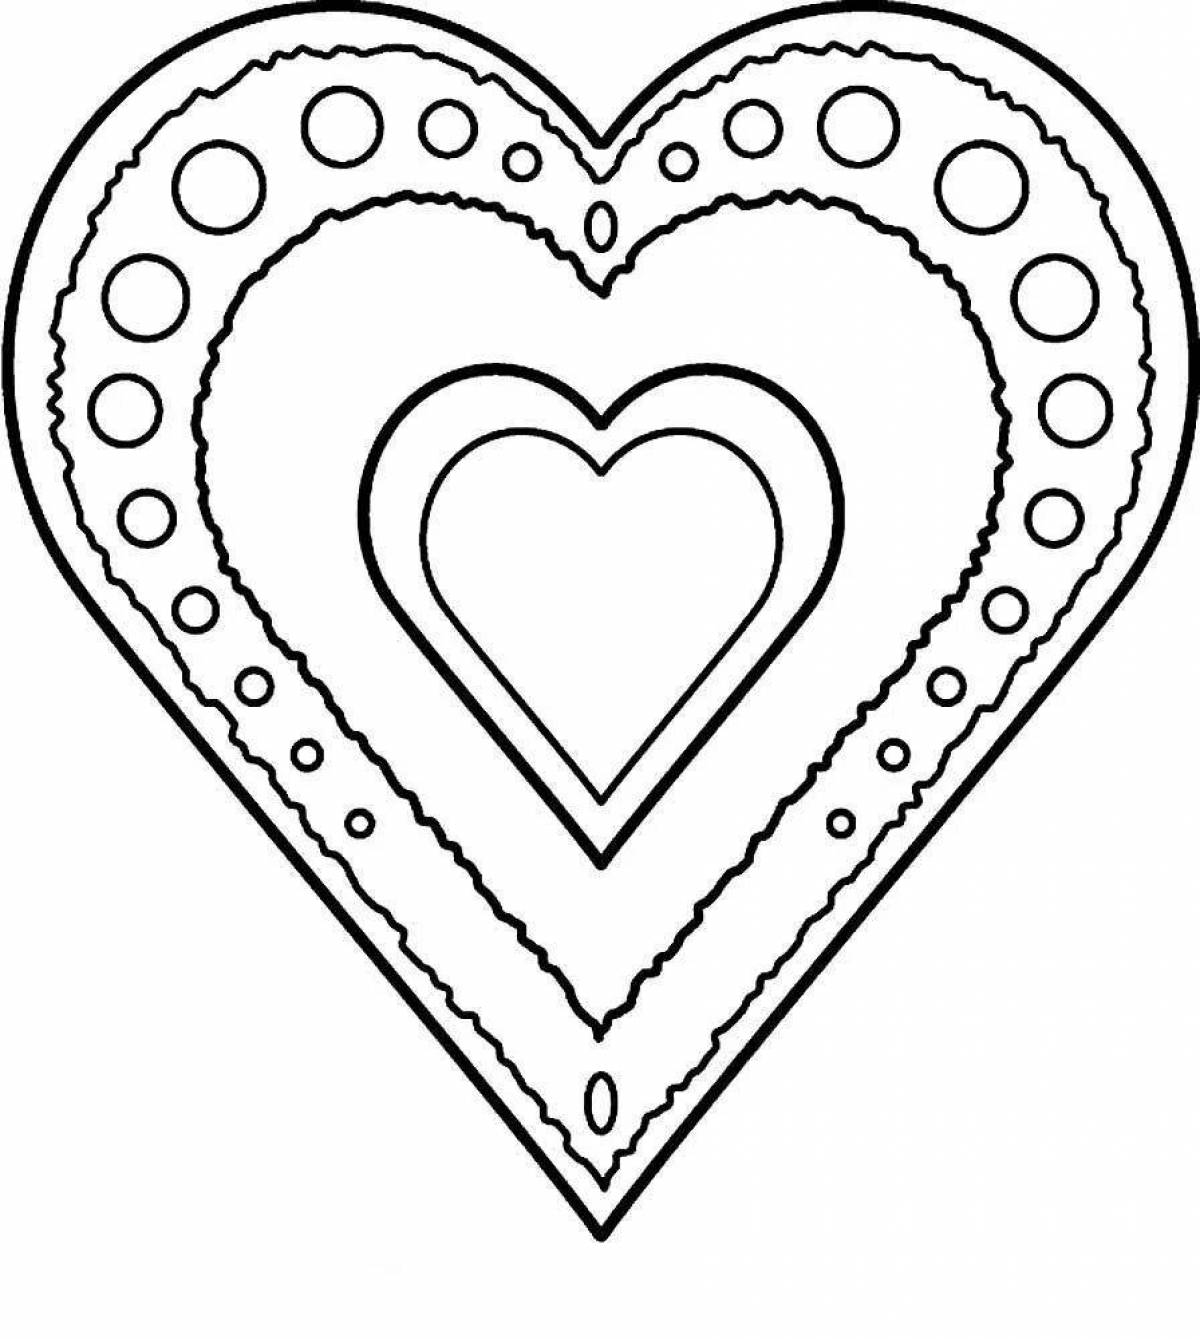 Glowing heart coloring book for 3-4 year olds